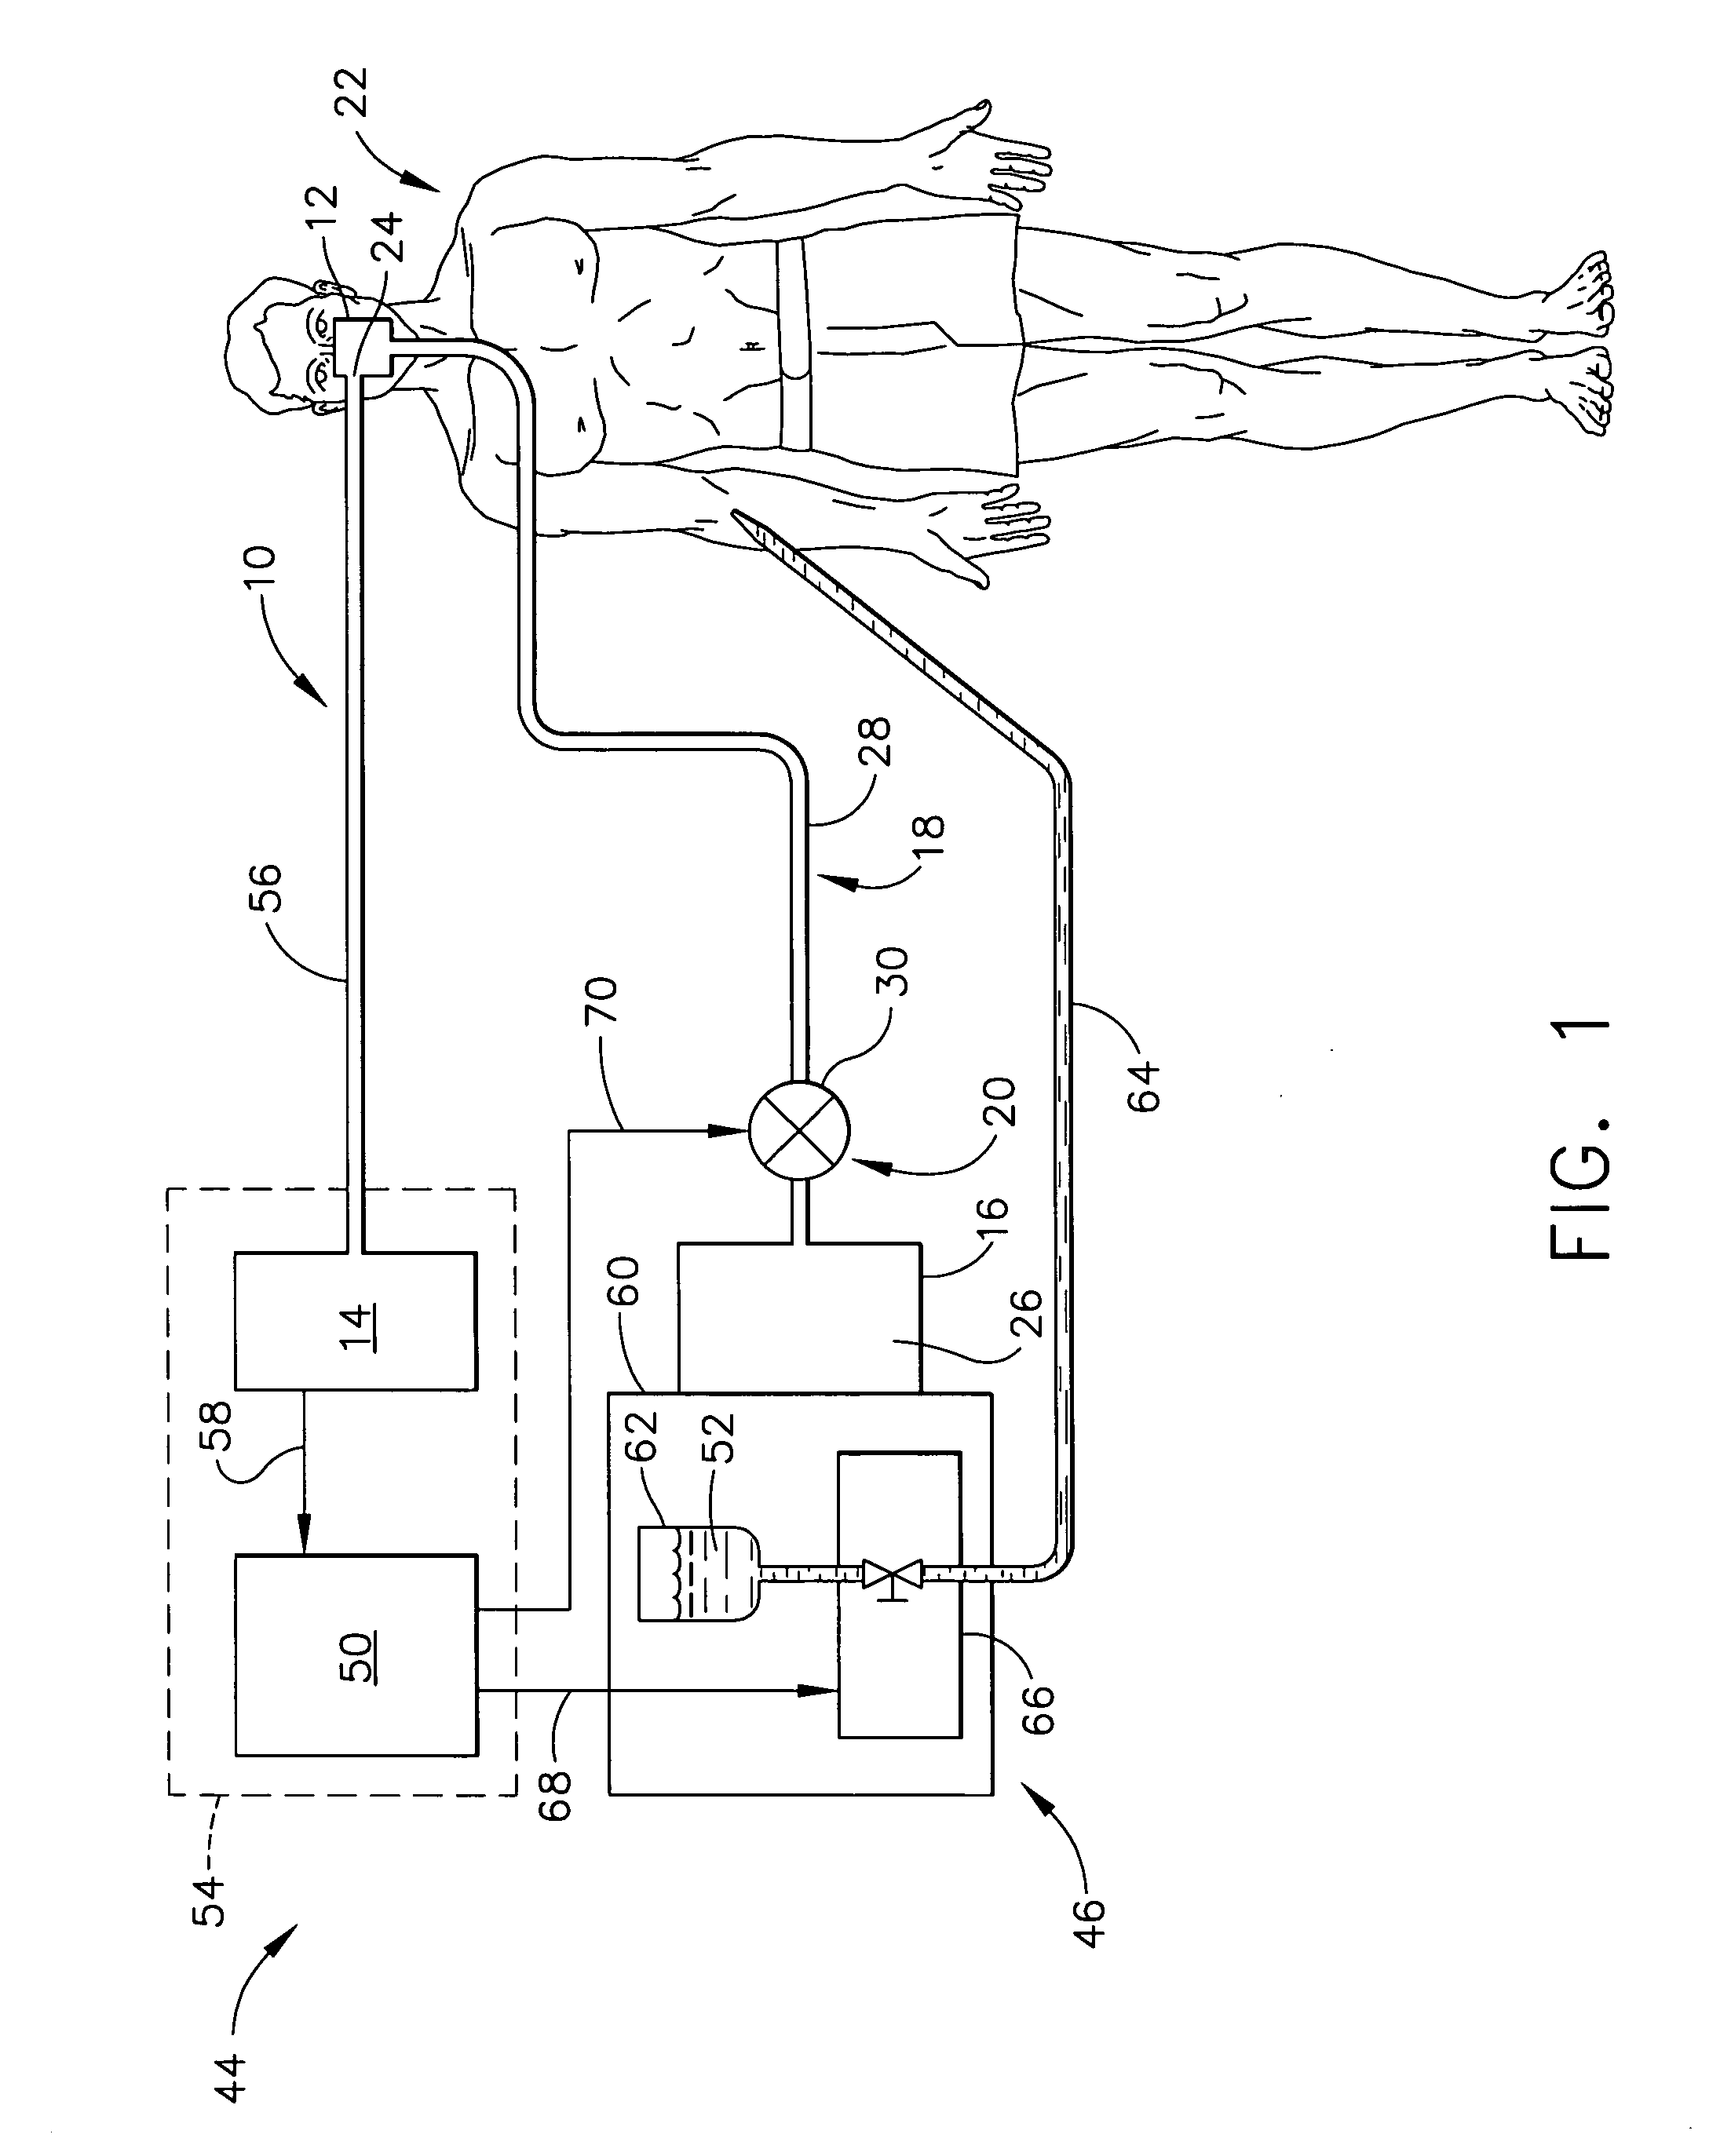 Cannula assembly and medical system employing a known carbon dioxide gas concentration